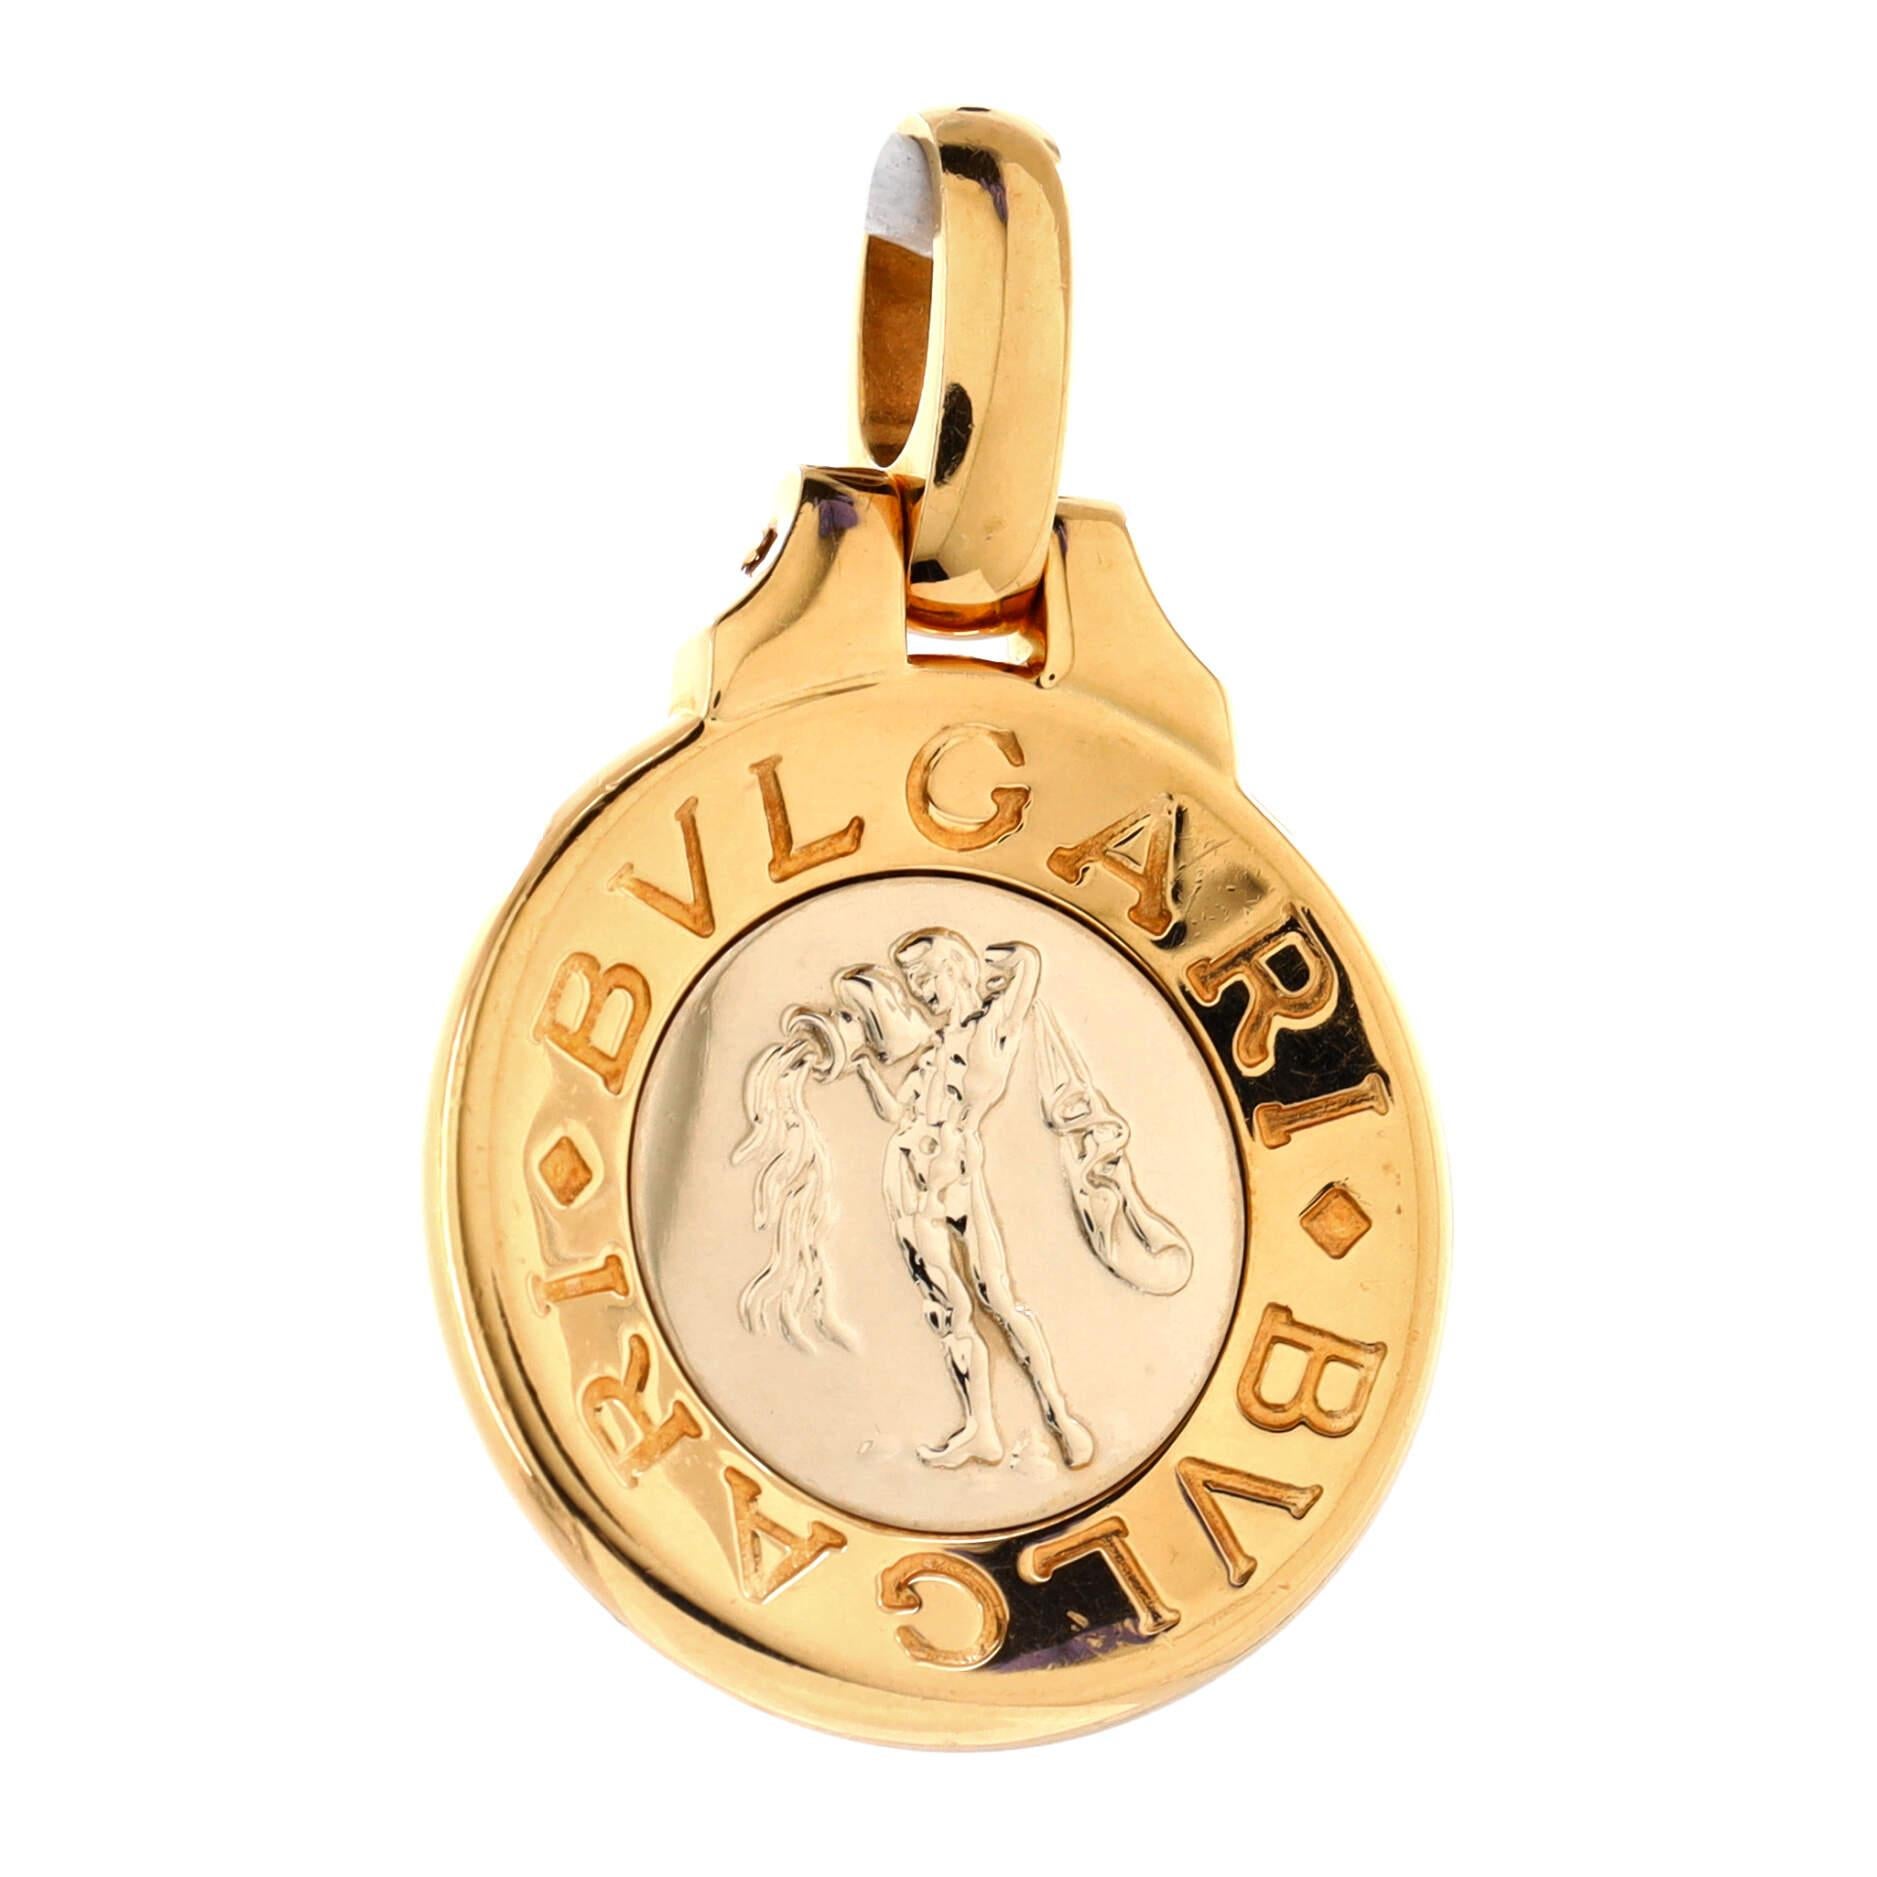 Condition: Good. Moderately heavy wear throughout. This is an Aquarius zodiac.
Accessories: No Accessories
Measurements: Height/Length: 37.70 mm, Width: 25.00 mm
Designer: Bvlgari
Model: Zodiac Pendant Charm Pendant & Charms 18K Yellow Gold and 18K